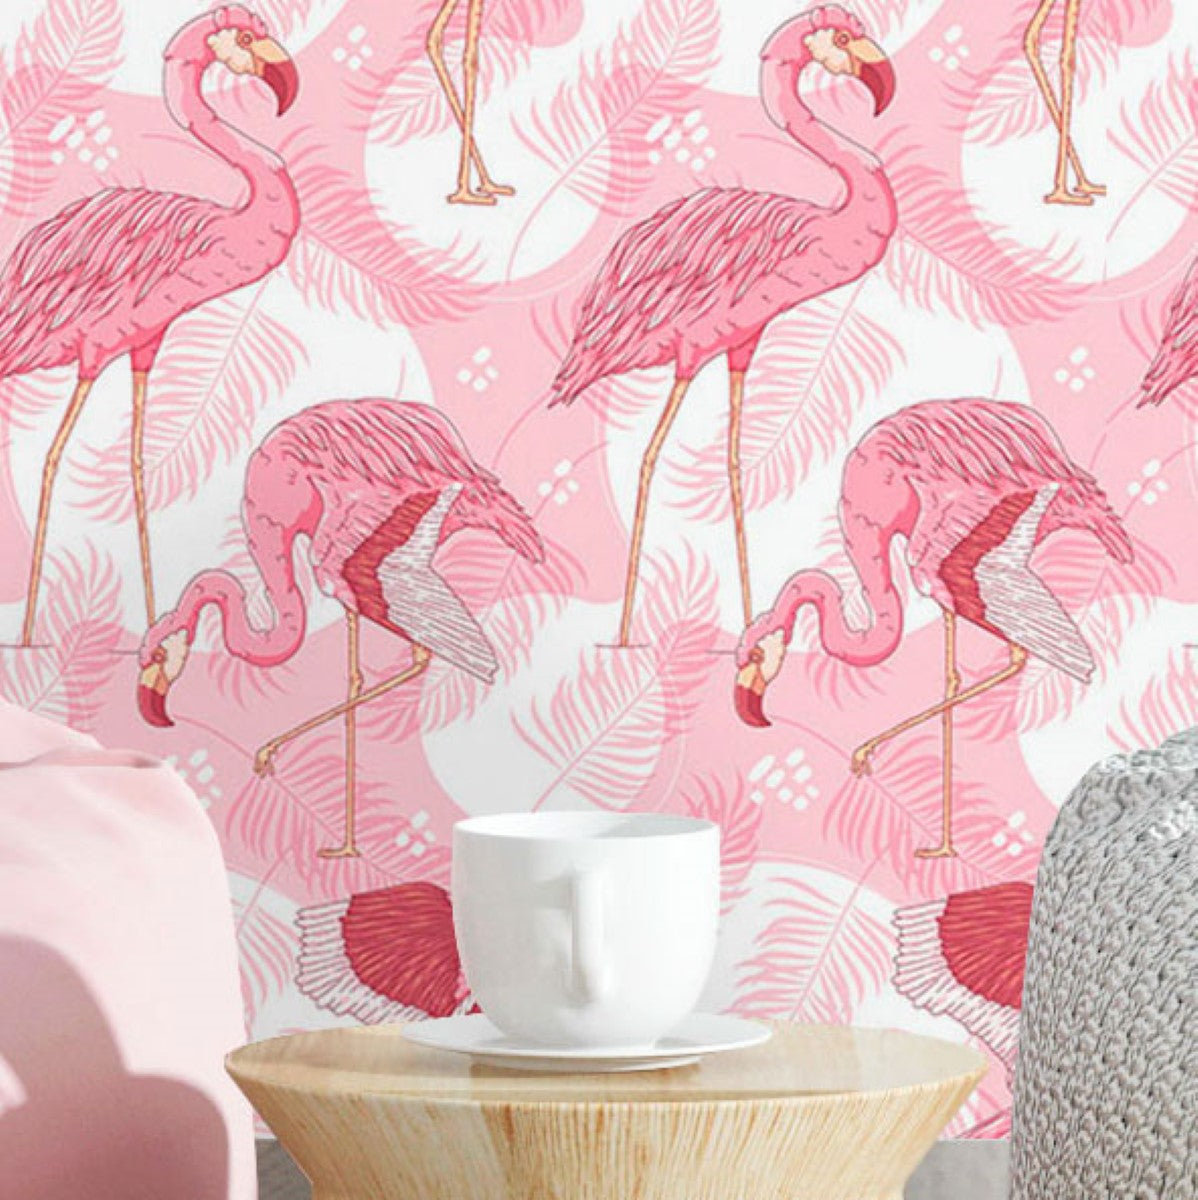 Buy Flamingo Elephant Peel and Stick Wallpaper Removable Online in India   Etsy